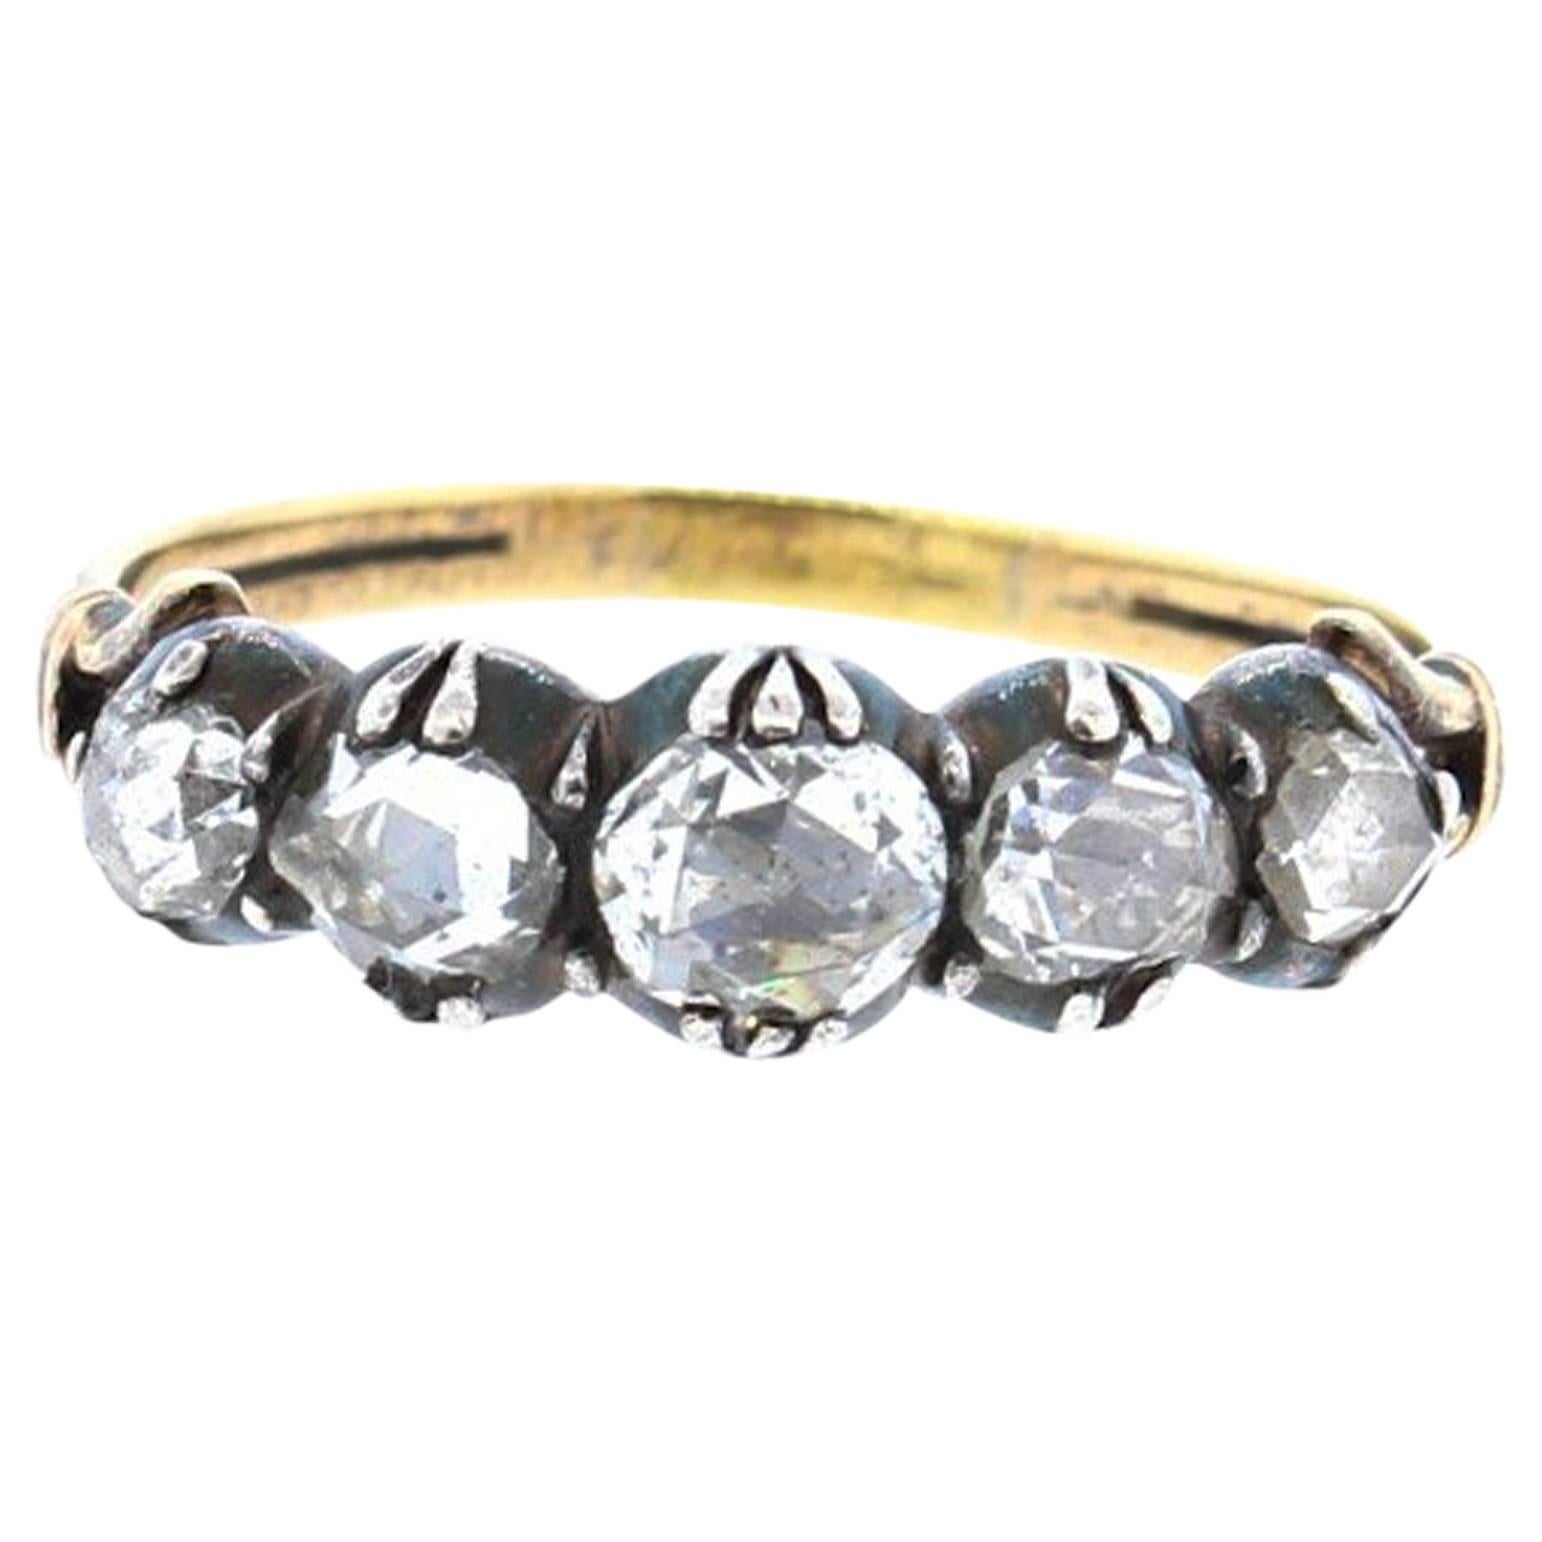 Early Victorian Five-Stone Rose Cut Diamond Ring